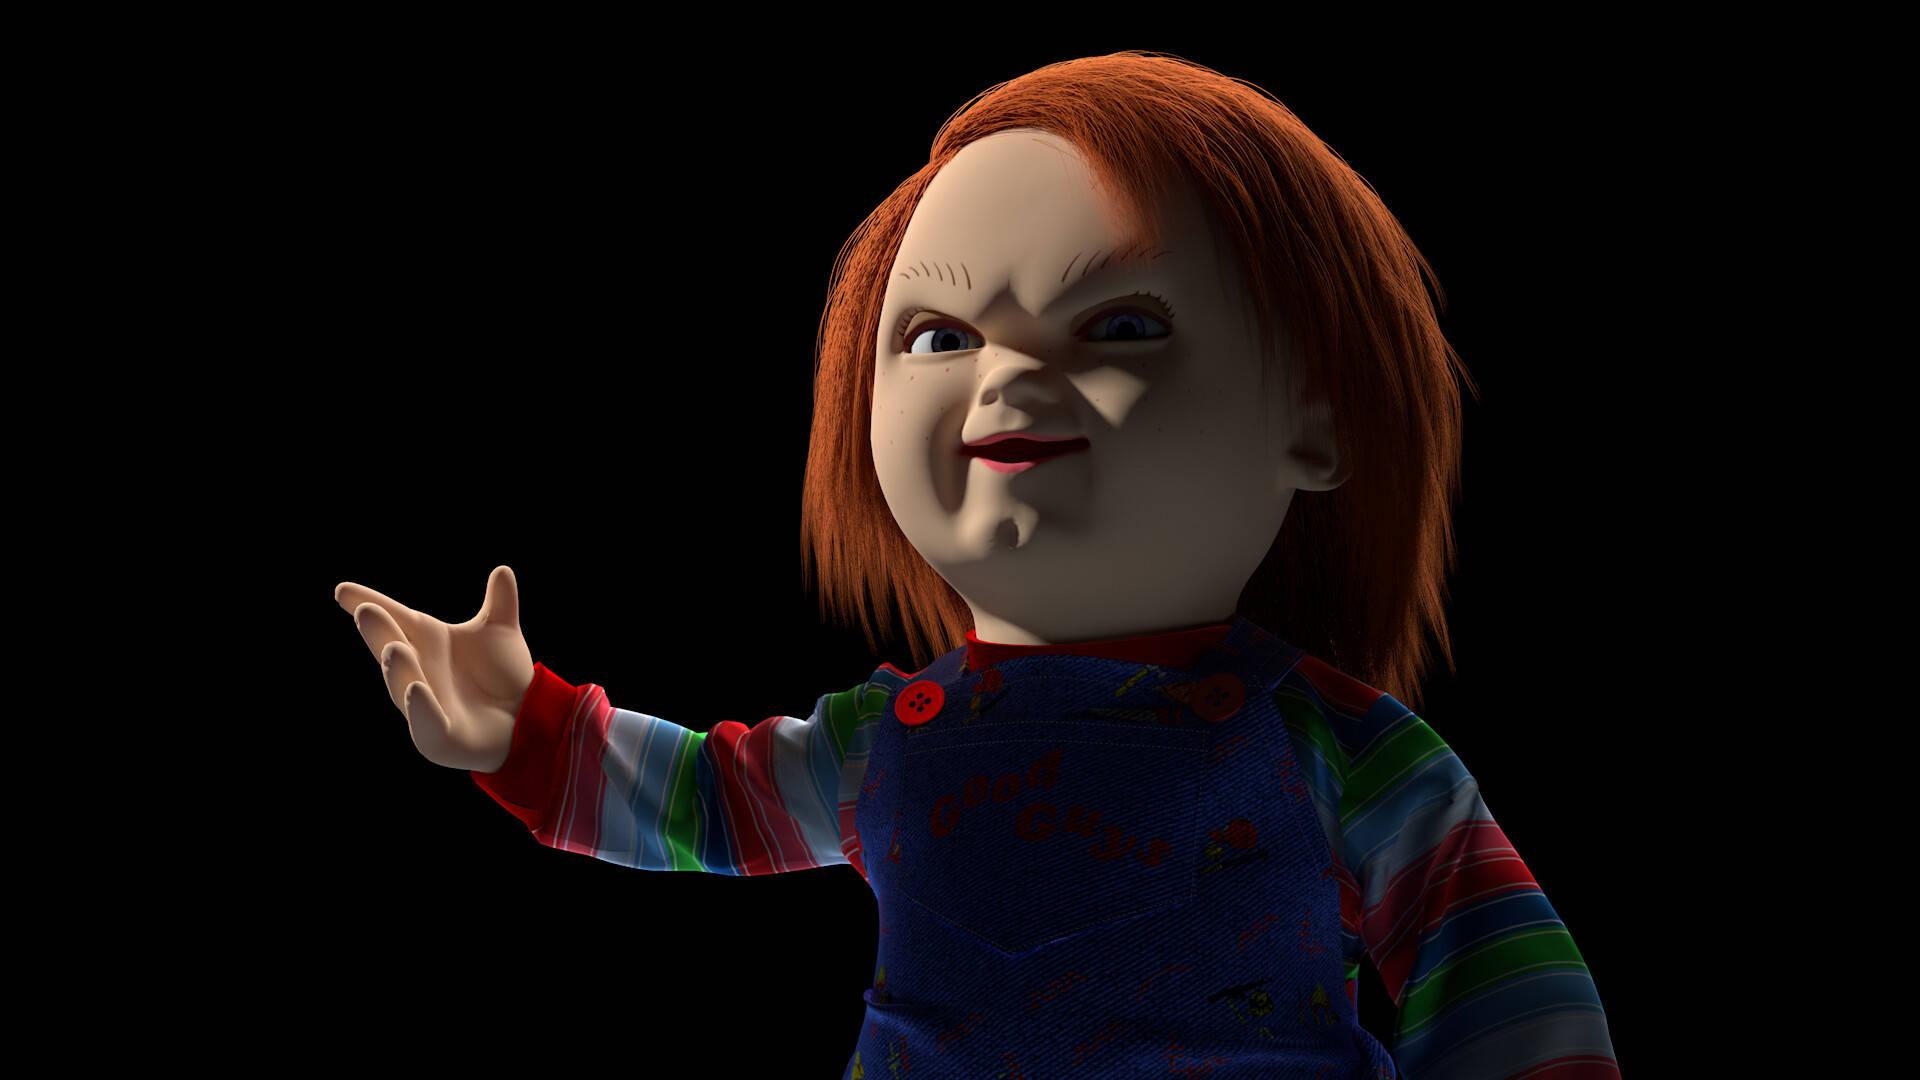 Download Child's Play 3d Chucky Wallpaper 